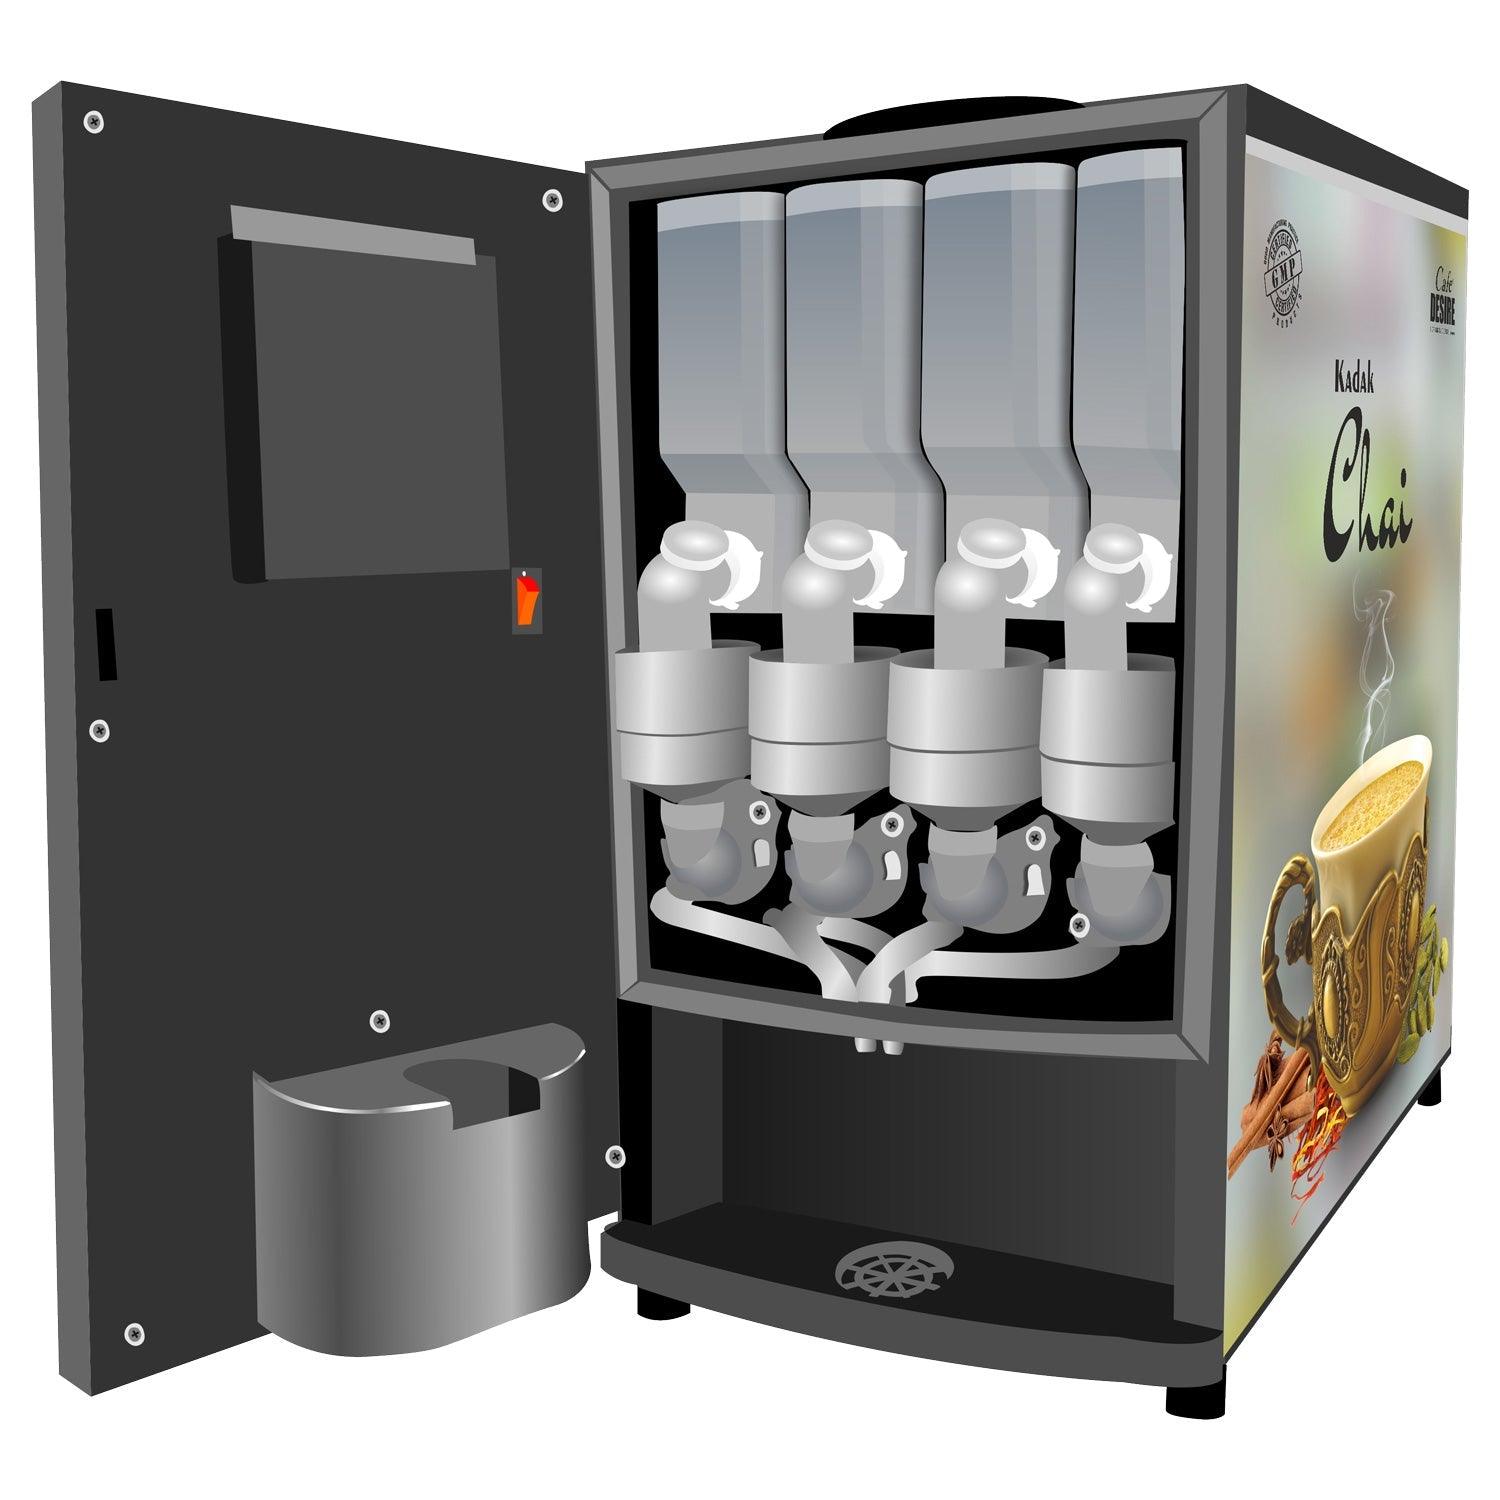 Coffee Machine 4 Lane | Four Beverage Options | Fully Automatic Tea & Coffee Vending Machine | For Offices, Shops and Smart Homes | Make 4 Varieties of Coffee Tea with Premix | No Milk, Tea, Coffee Powder Required - cd-usa.com